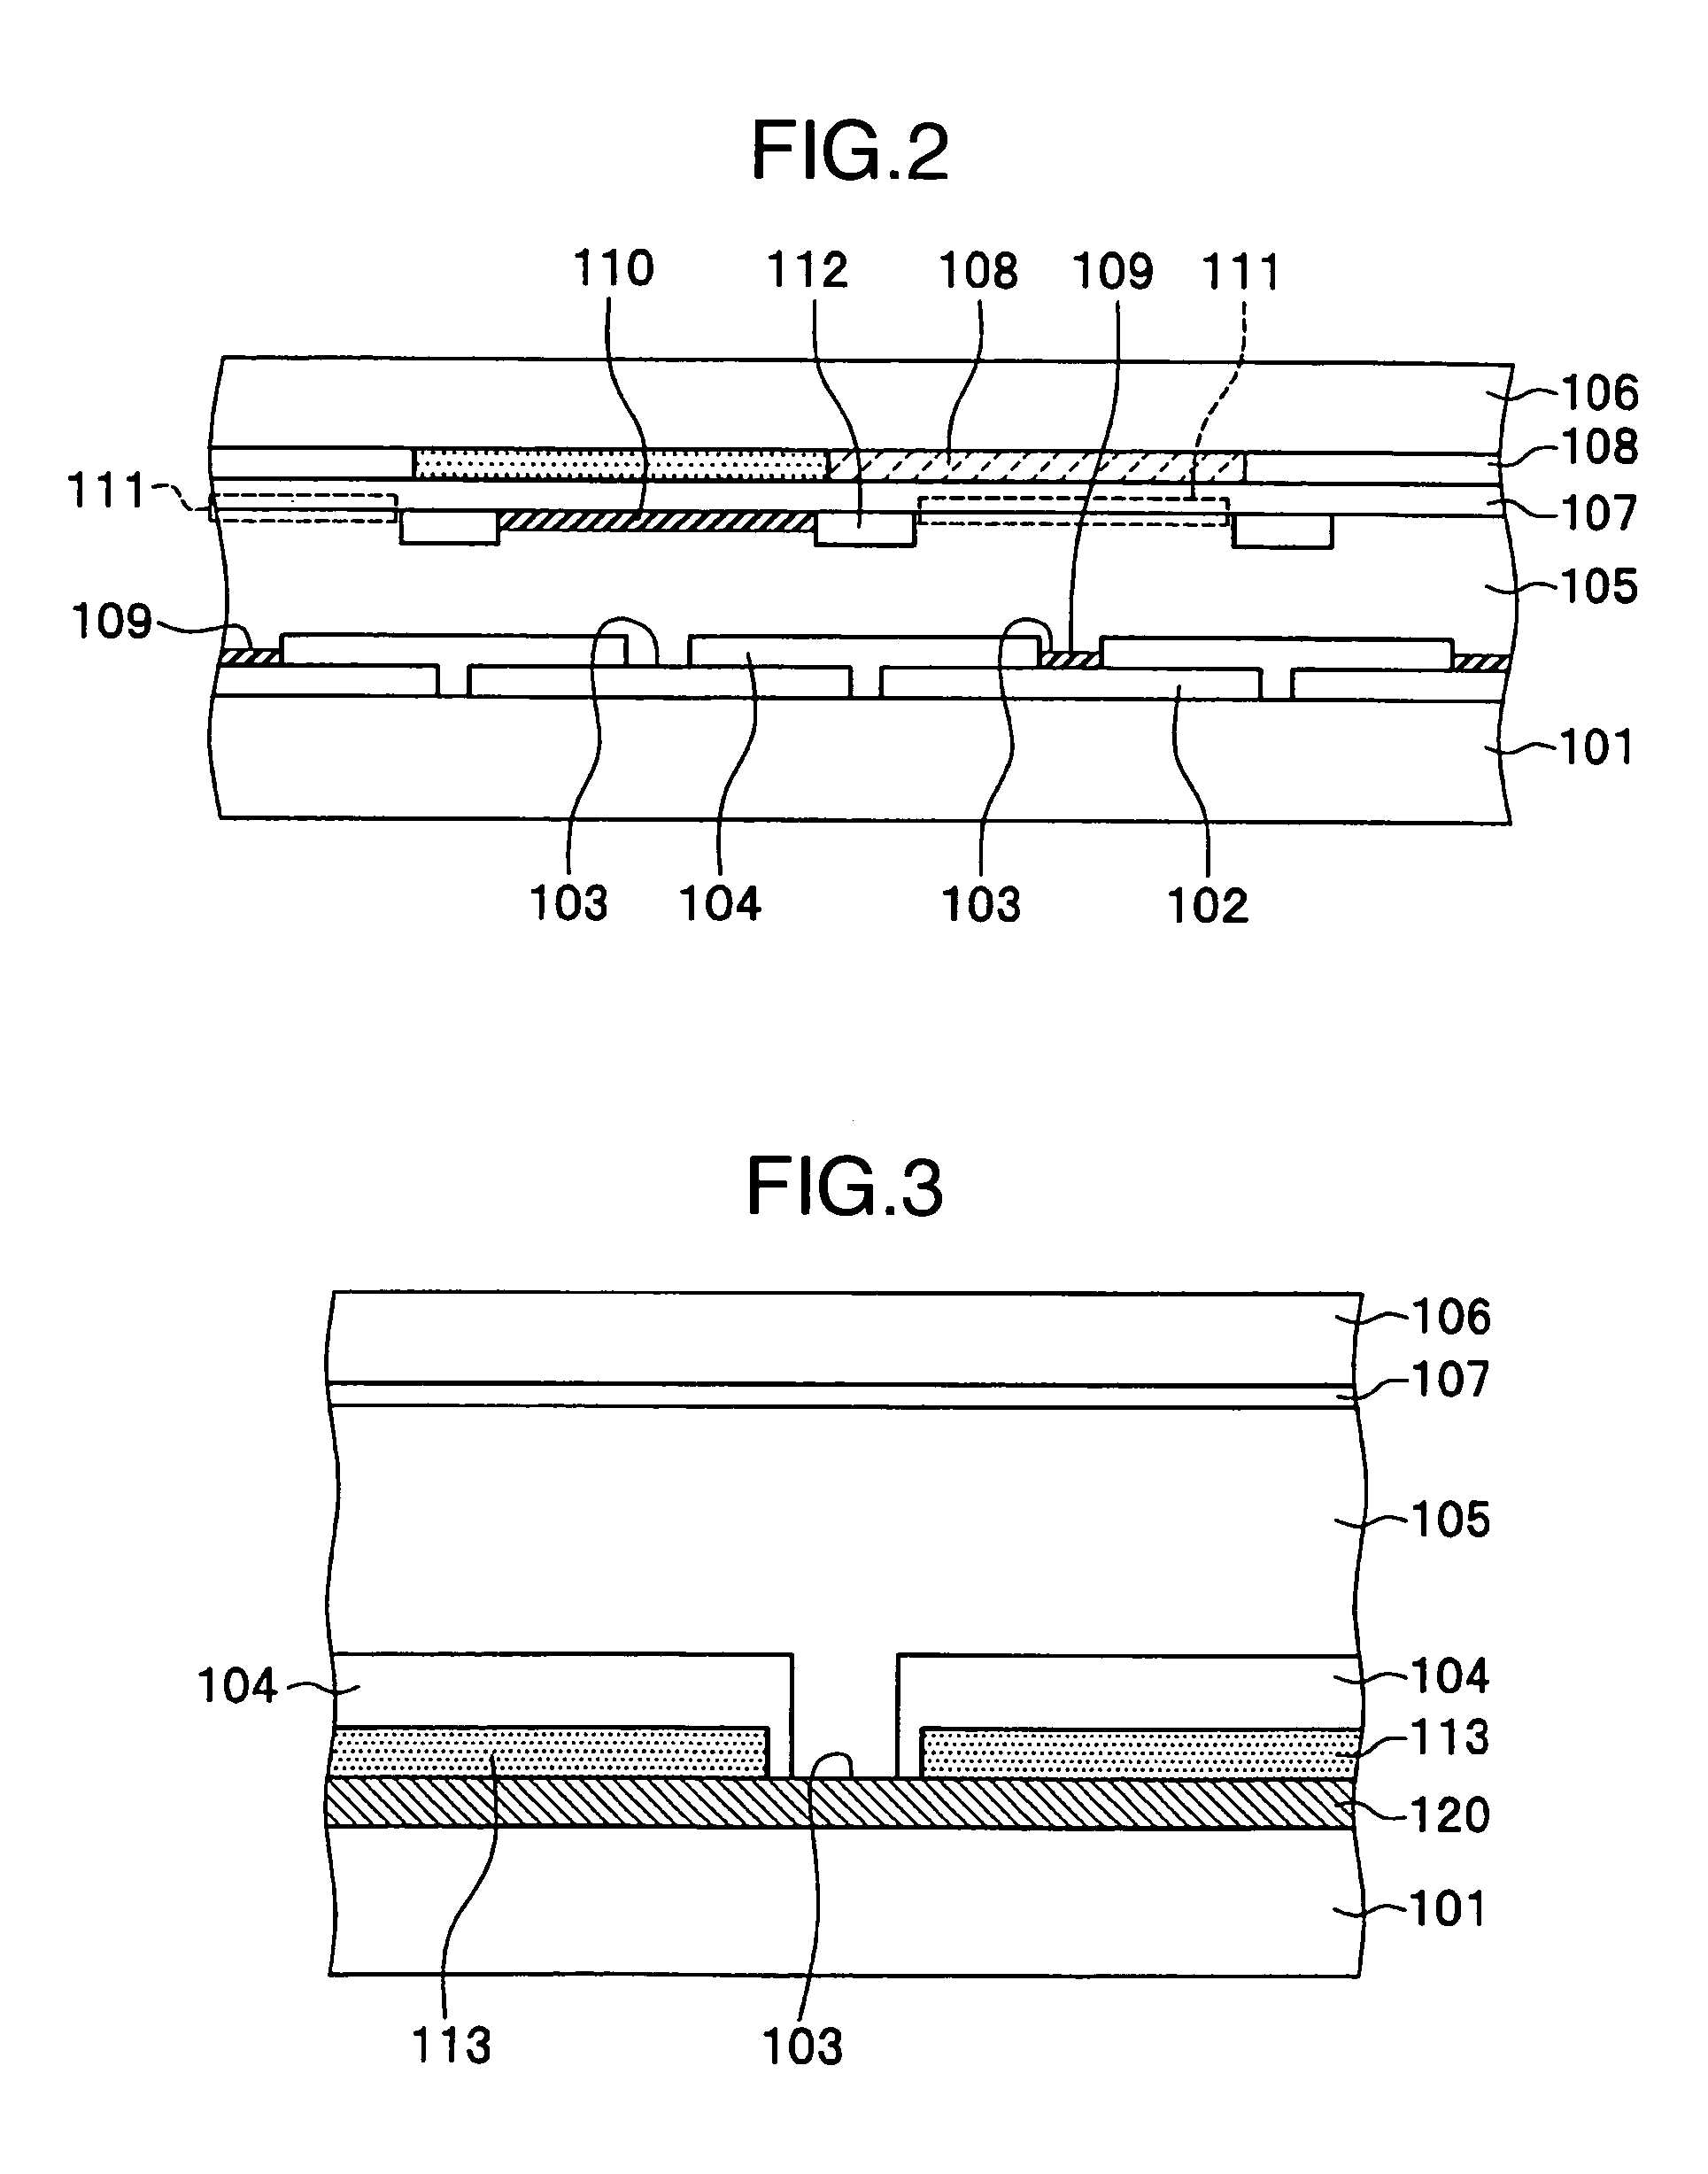 High-definition pixel structure of electrochromic displays and method of producing the same